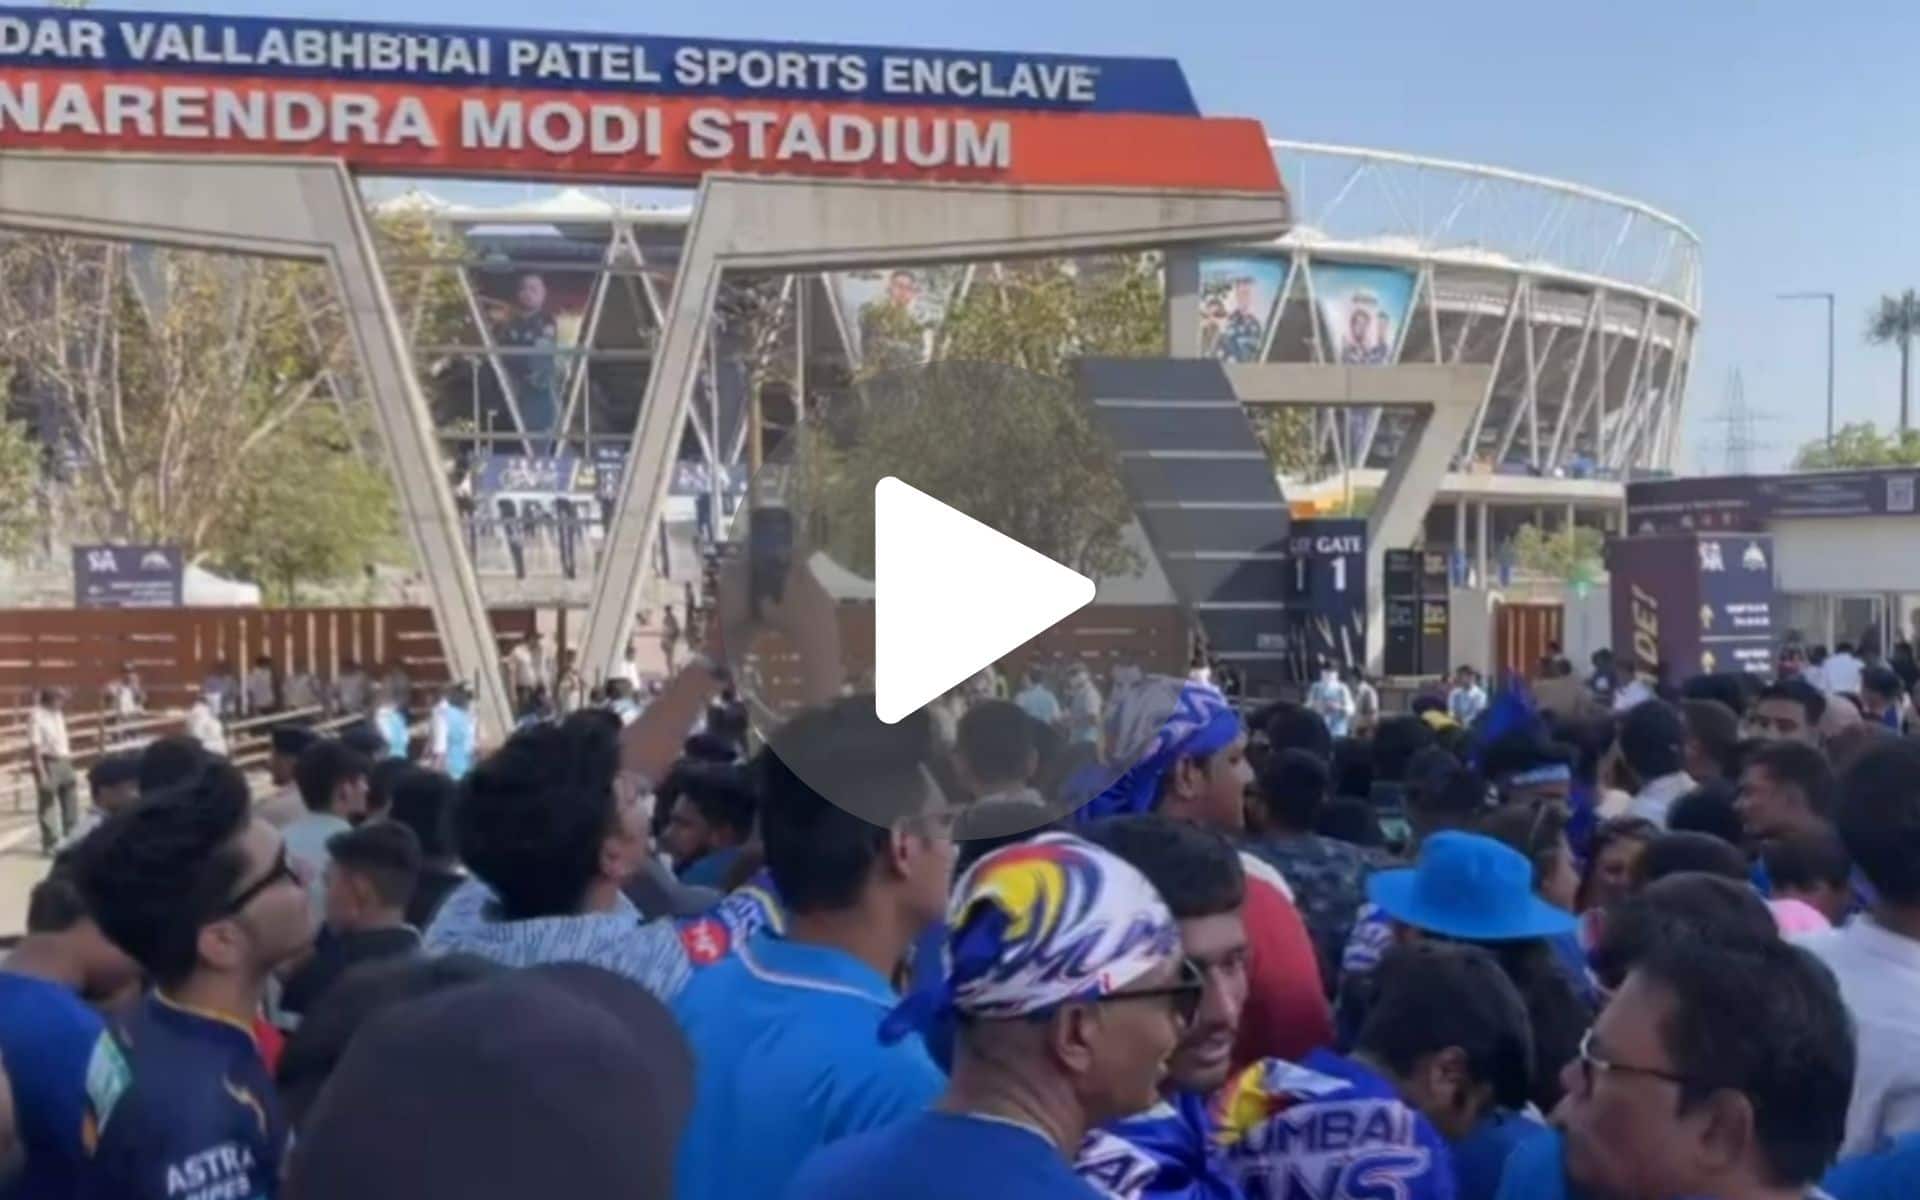 [Watch] Pandya To Get Trolled In Ahmedabad? 'Rohit Rohit' Chants Outside Stadium Before GT vs MI